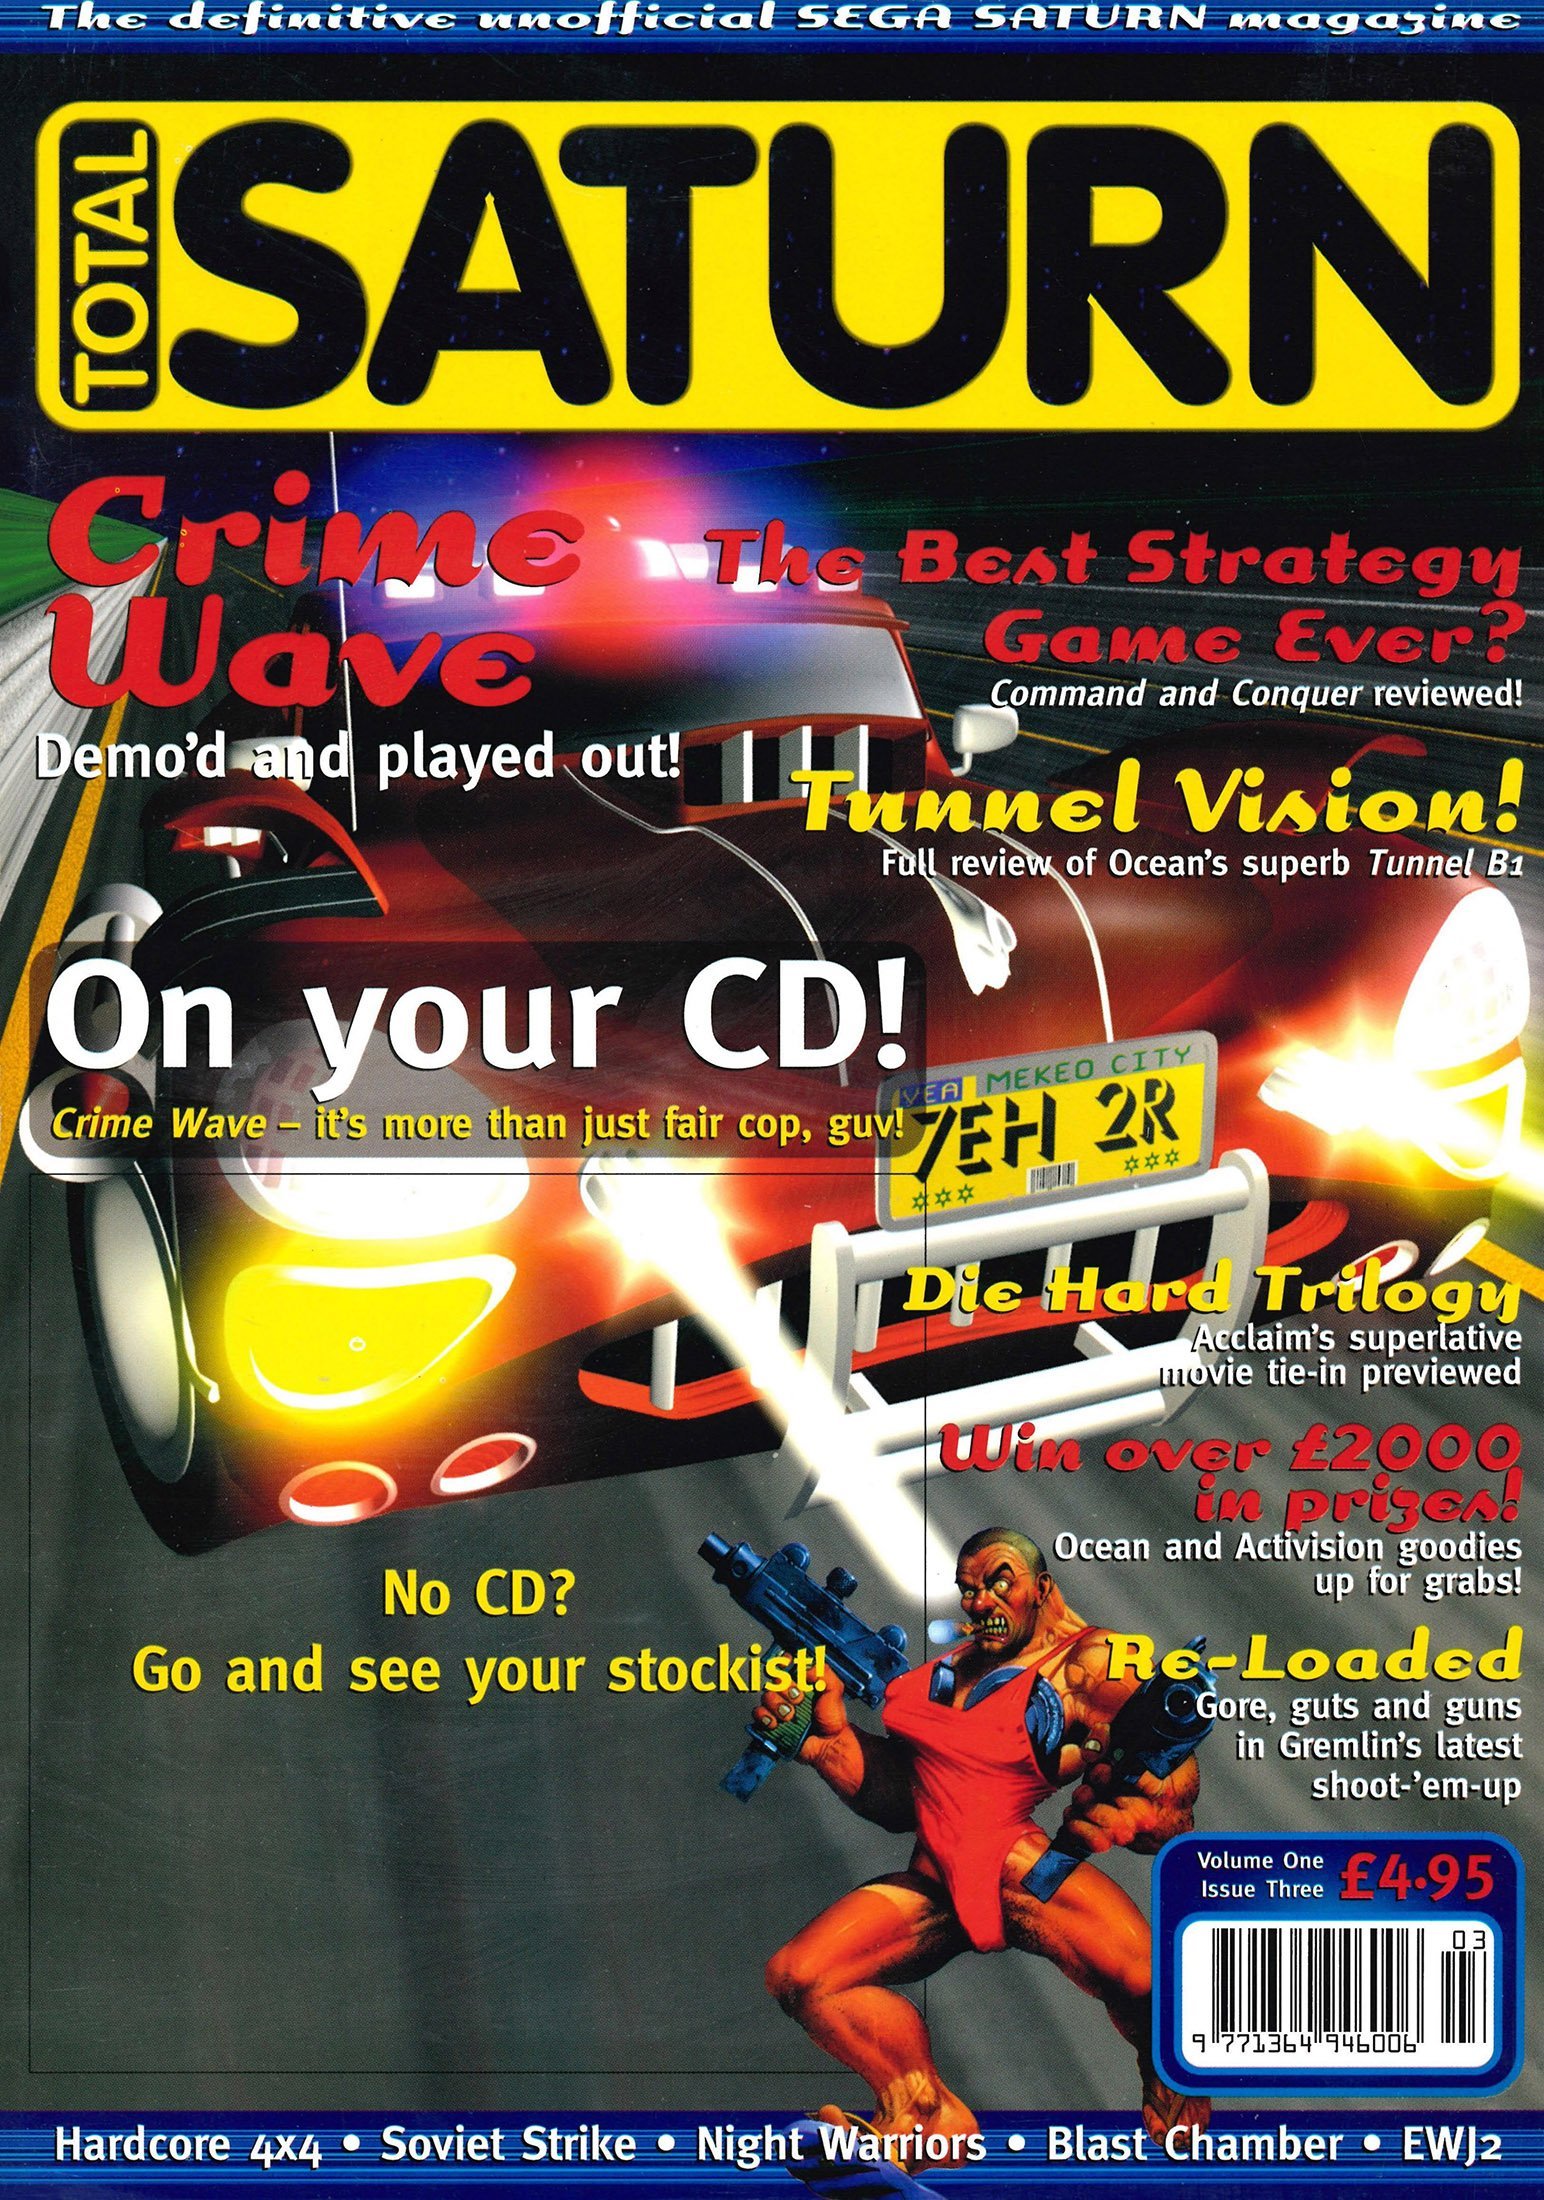 large.1036581562_TotalSaturn03_cover.jpg